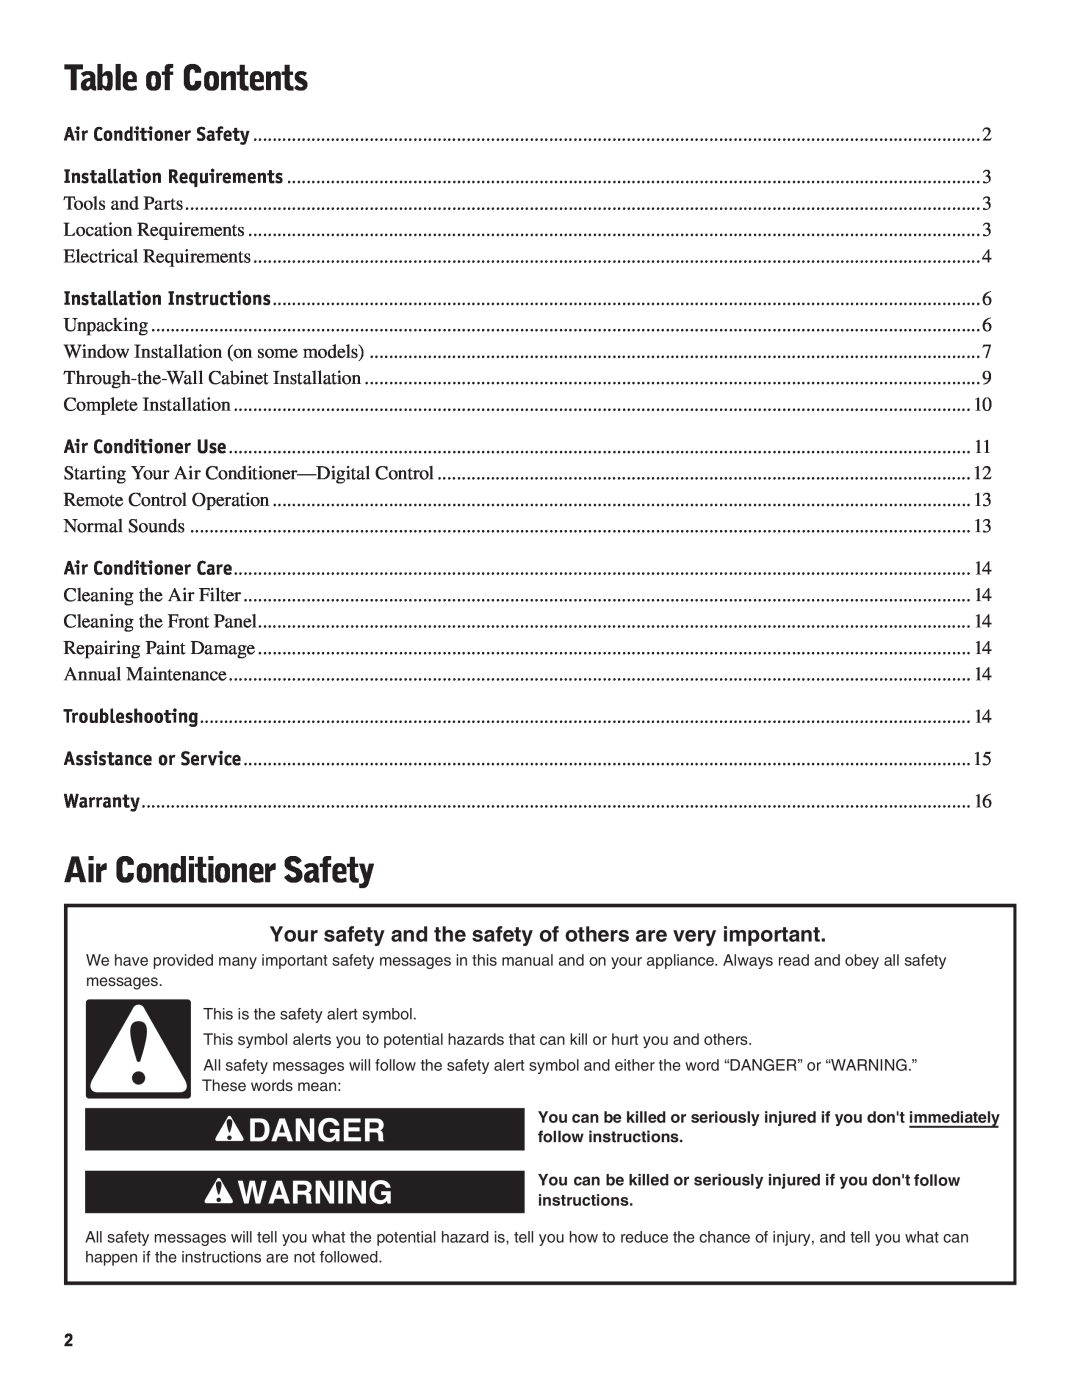 Friedrich CP18C30 manual Table of Contents, Air Conditioner Safety, Danger Warning 